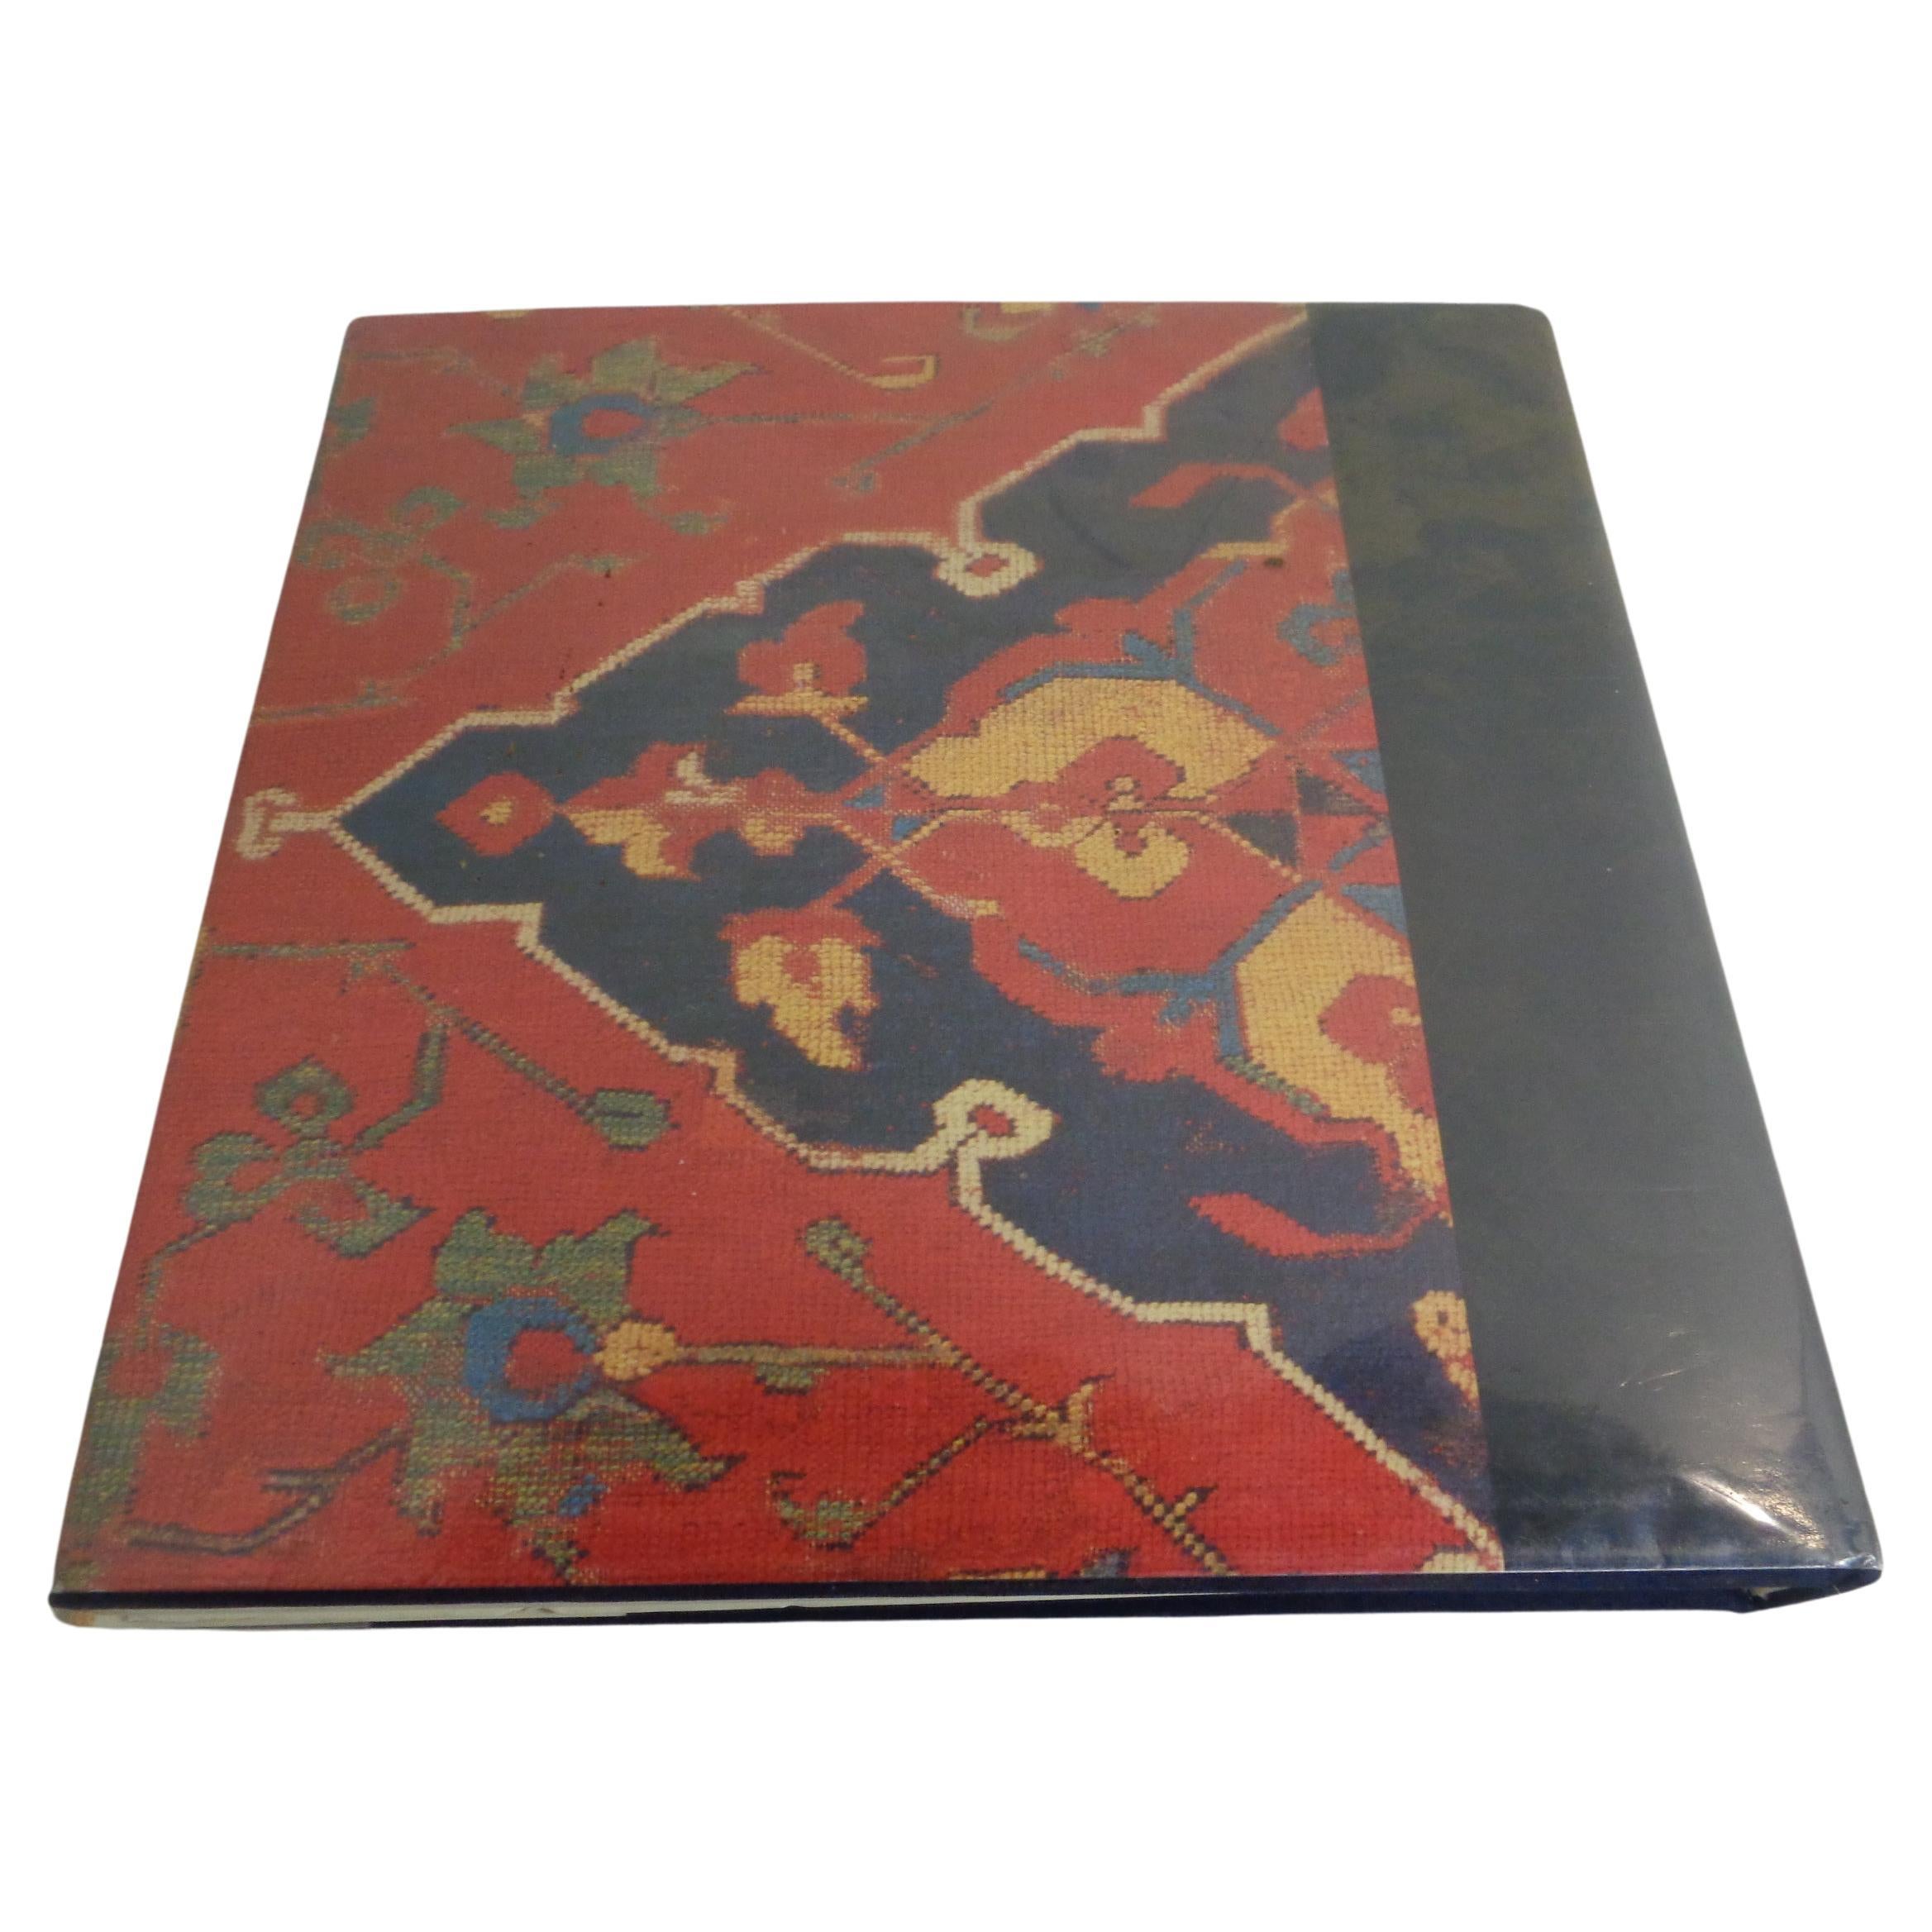 Oriental Carpets - In The Philadelphia Museum of Art - 1988 by Charles Grant Ellis Harcover blue cloth book w/ gilt lettering / decorated dust wrapper w/ protective mylar covering. 304 pages w/ 81 illustrations - b/w and full color examples of rare